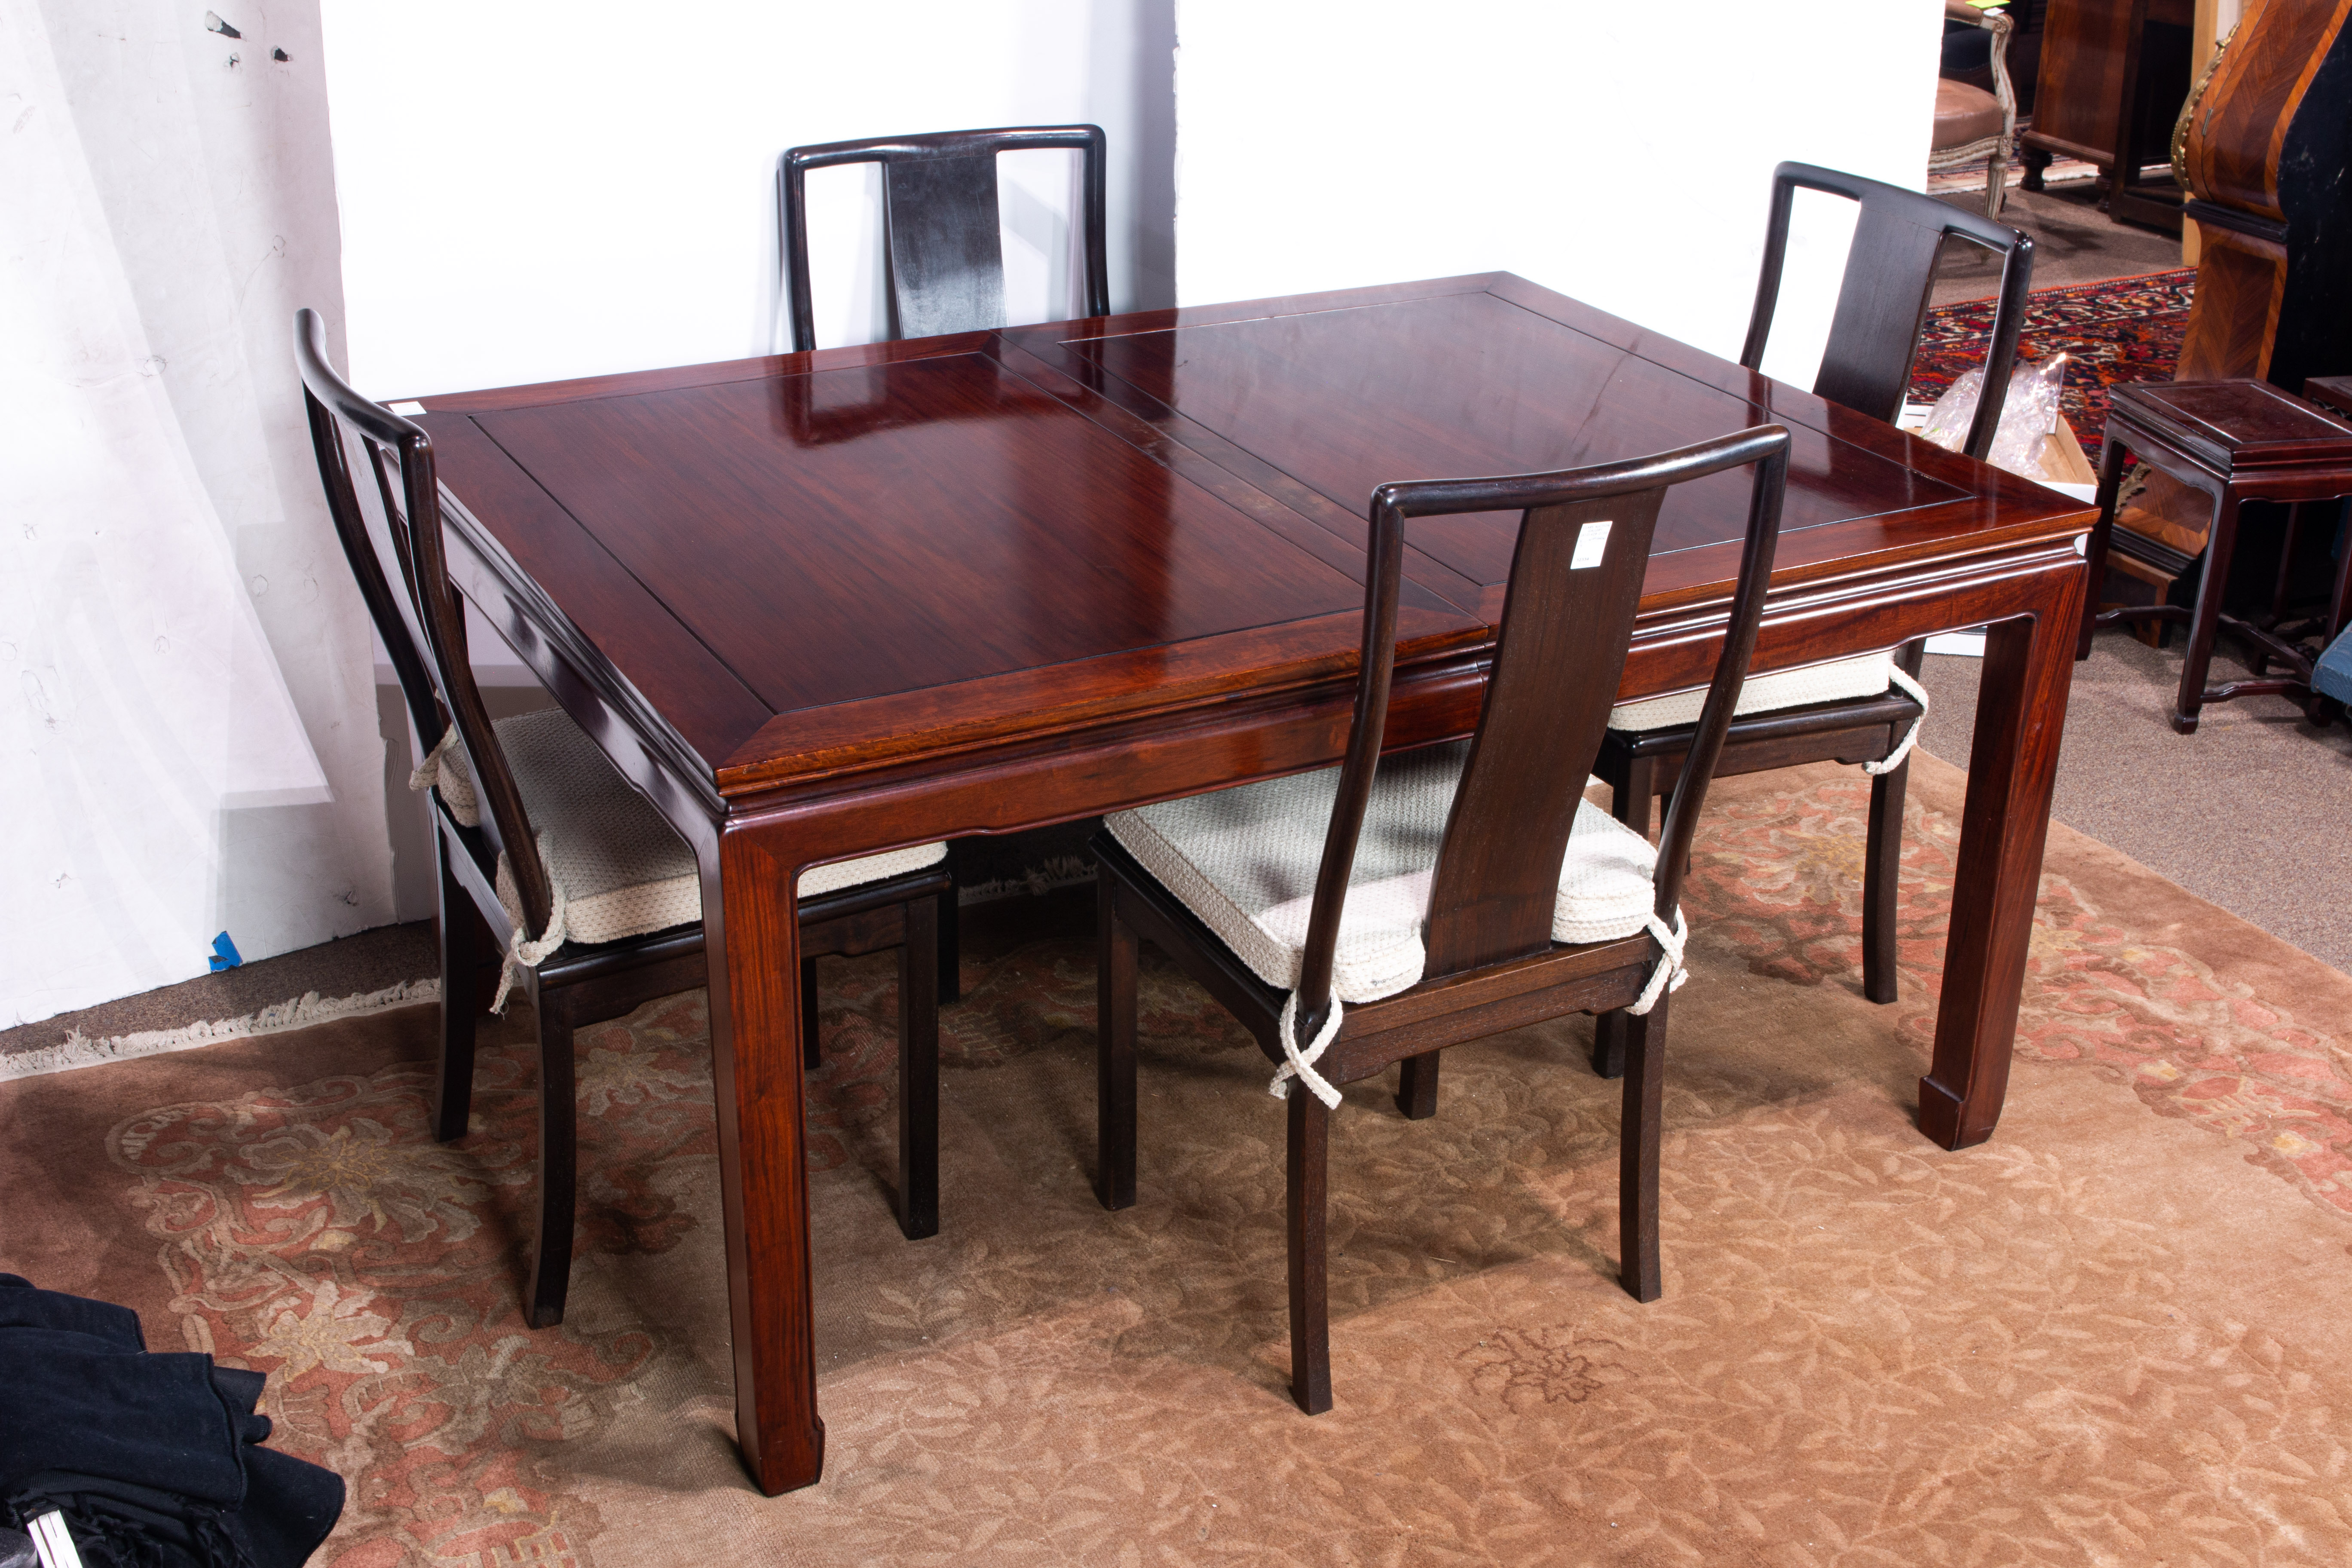 FOUR CHINESE STYLE HARDWOOD DINING 3a1588